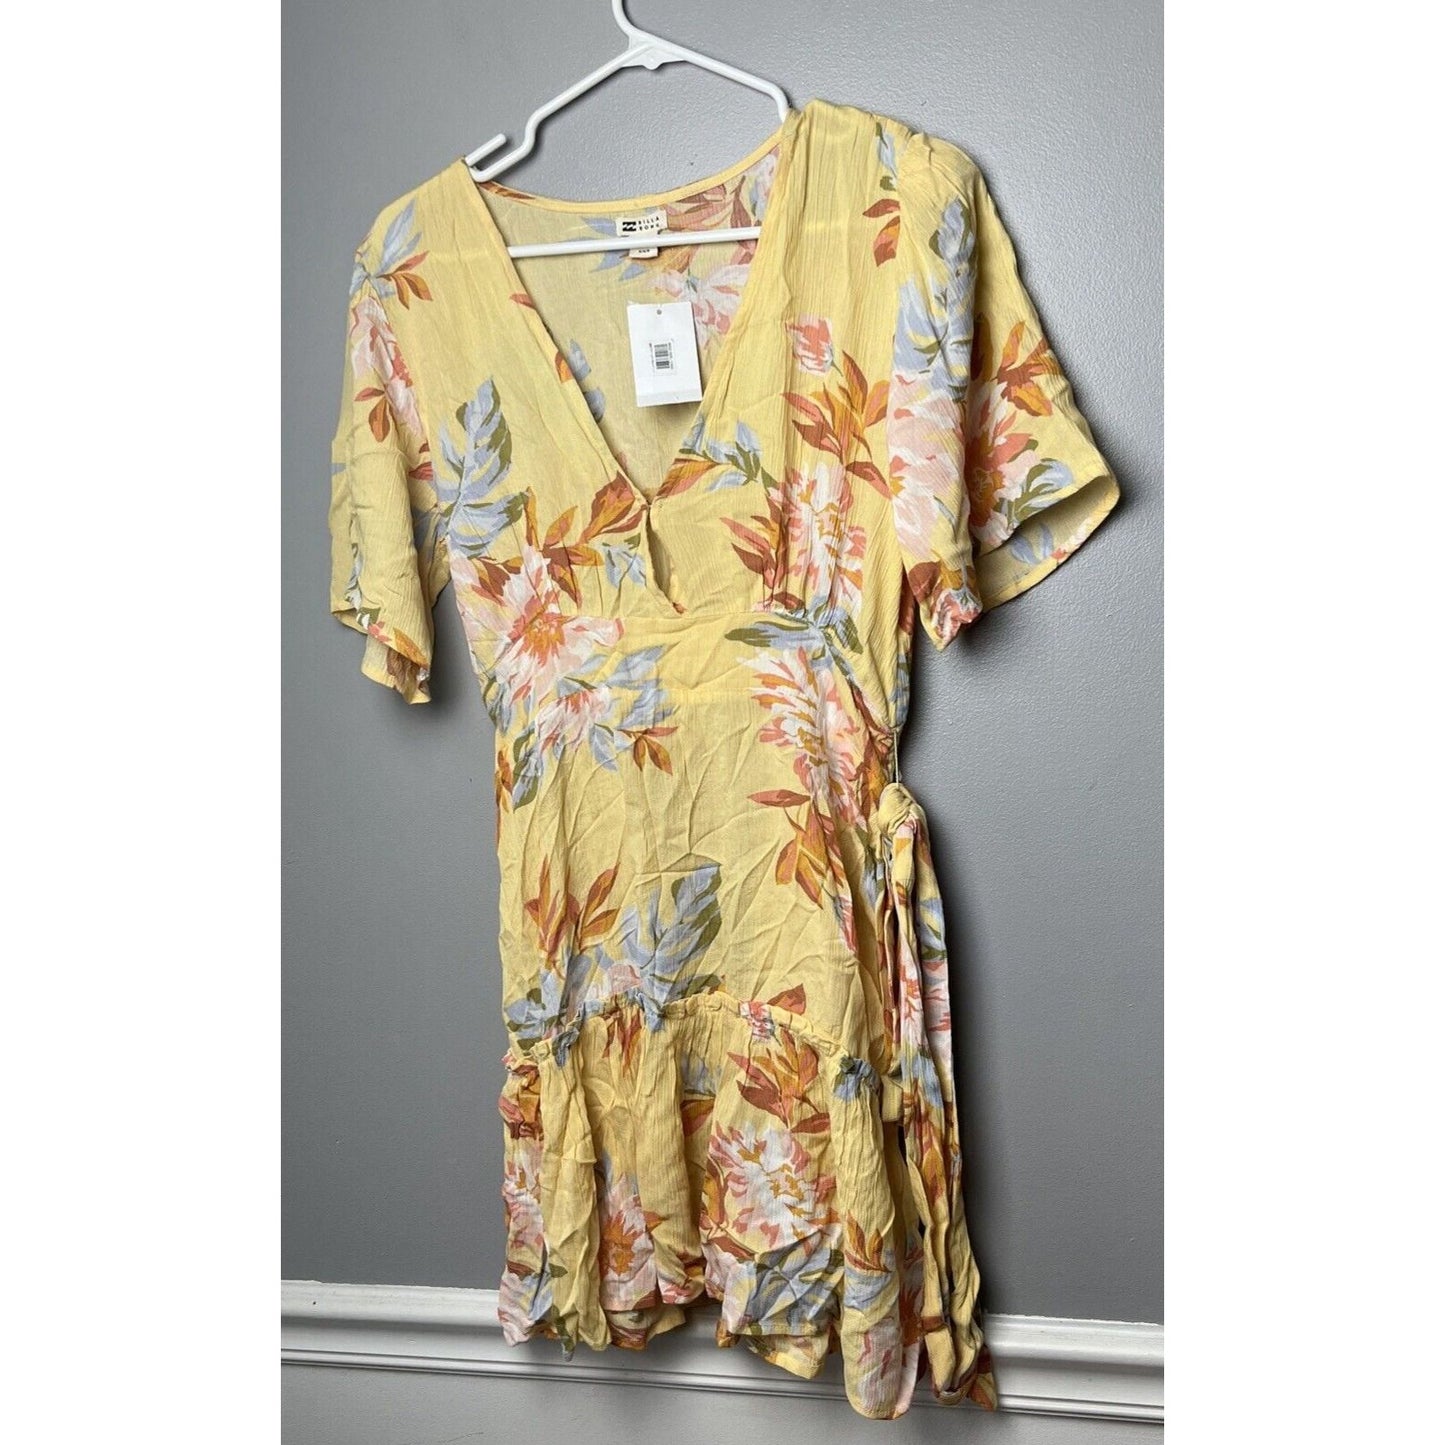 $70 Billabong Women’s One And Only Dress Mimosa Yellow Size M